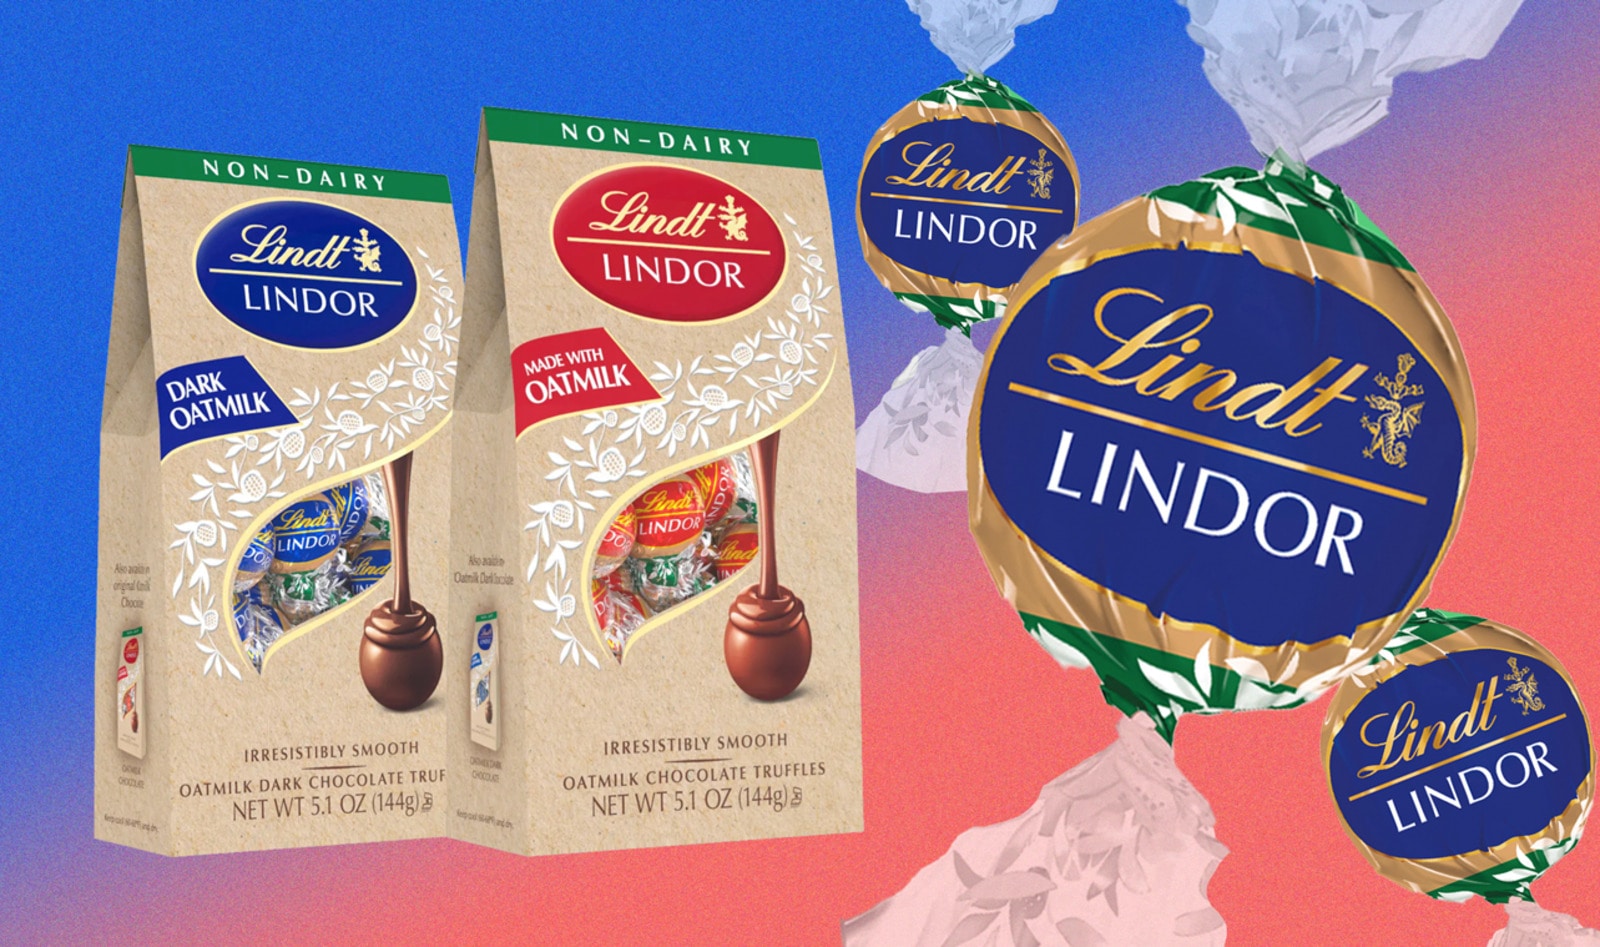 Lindt - Lindt added a new photo.